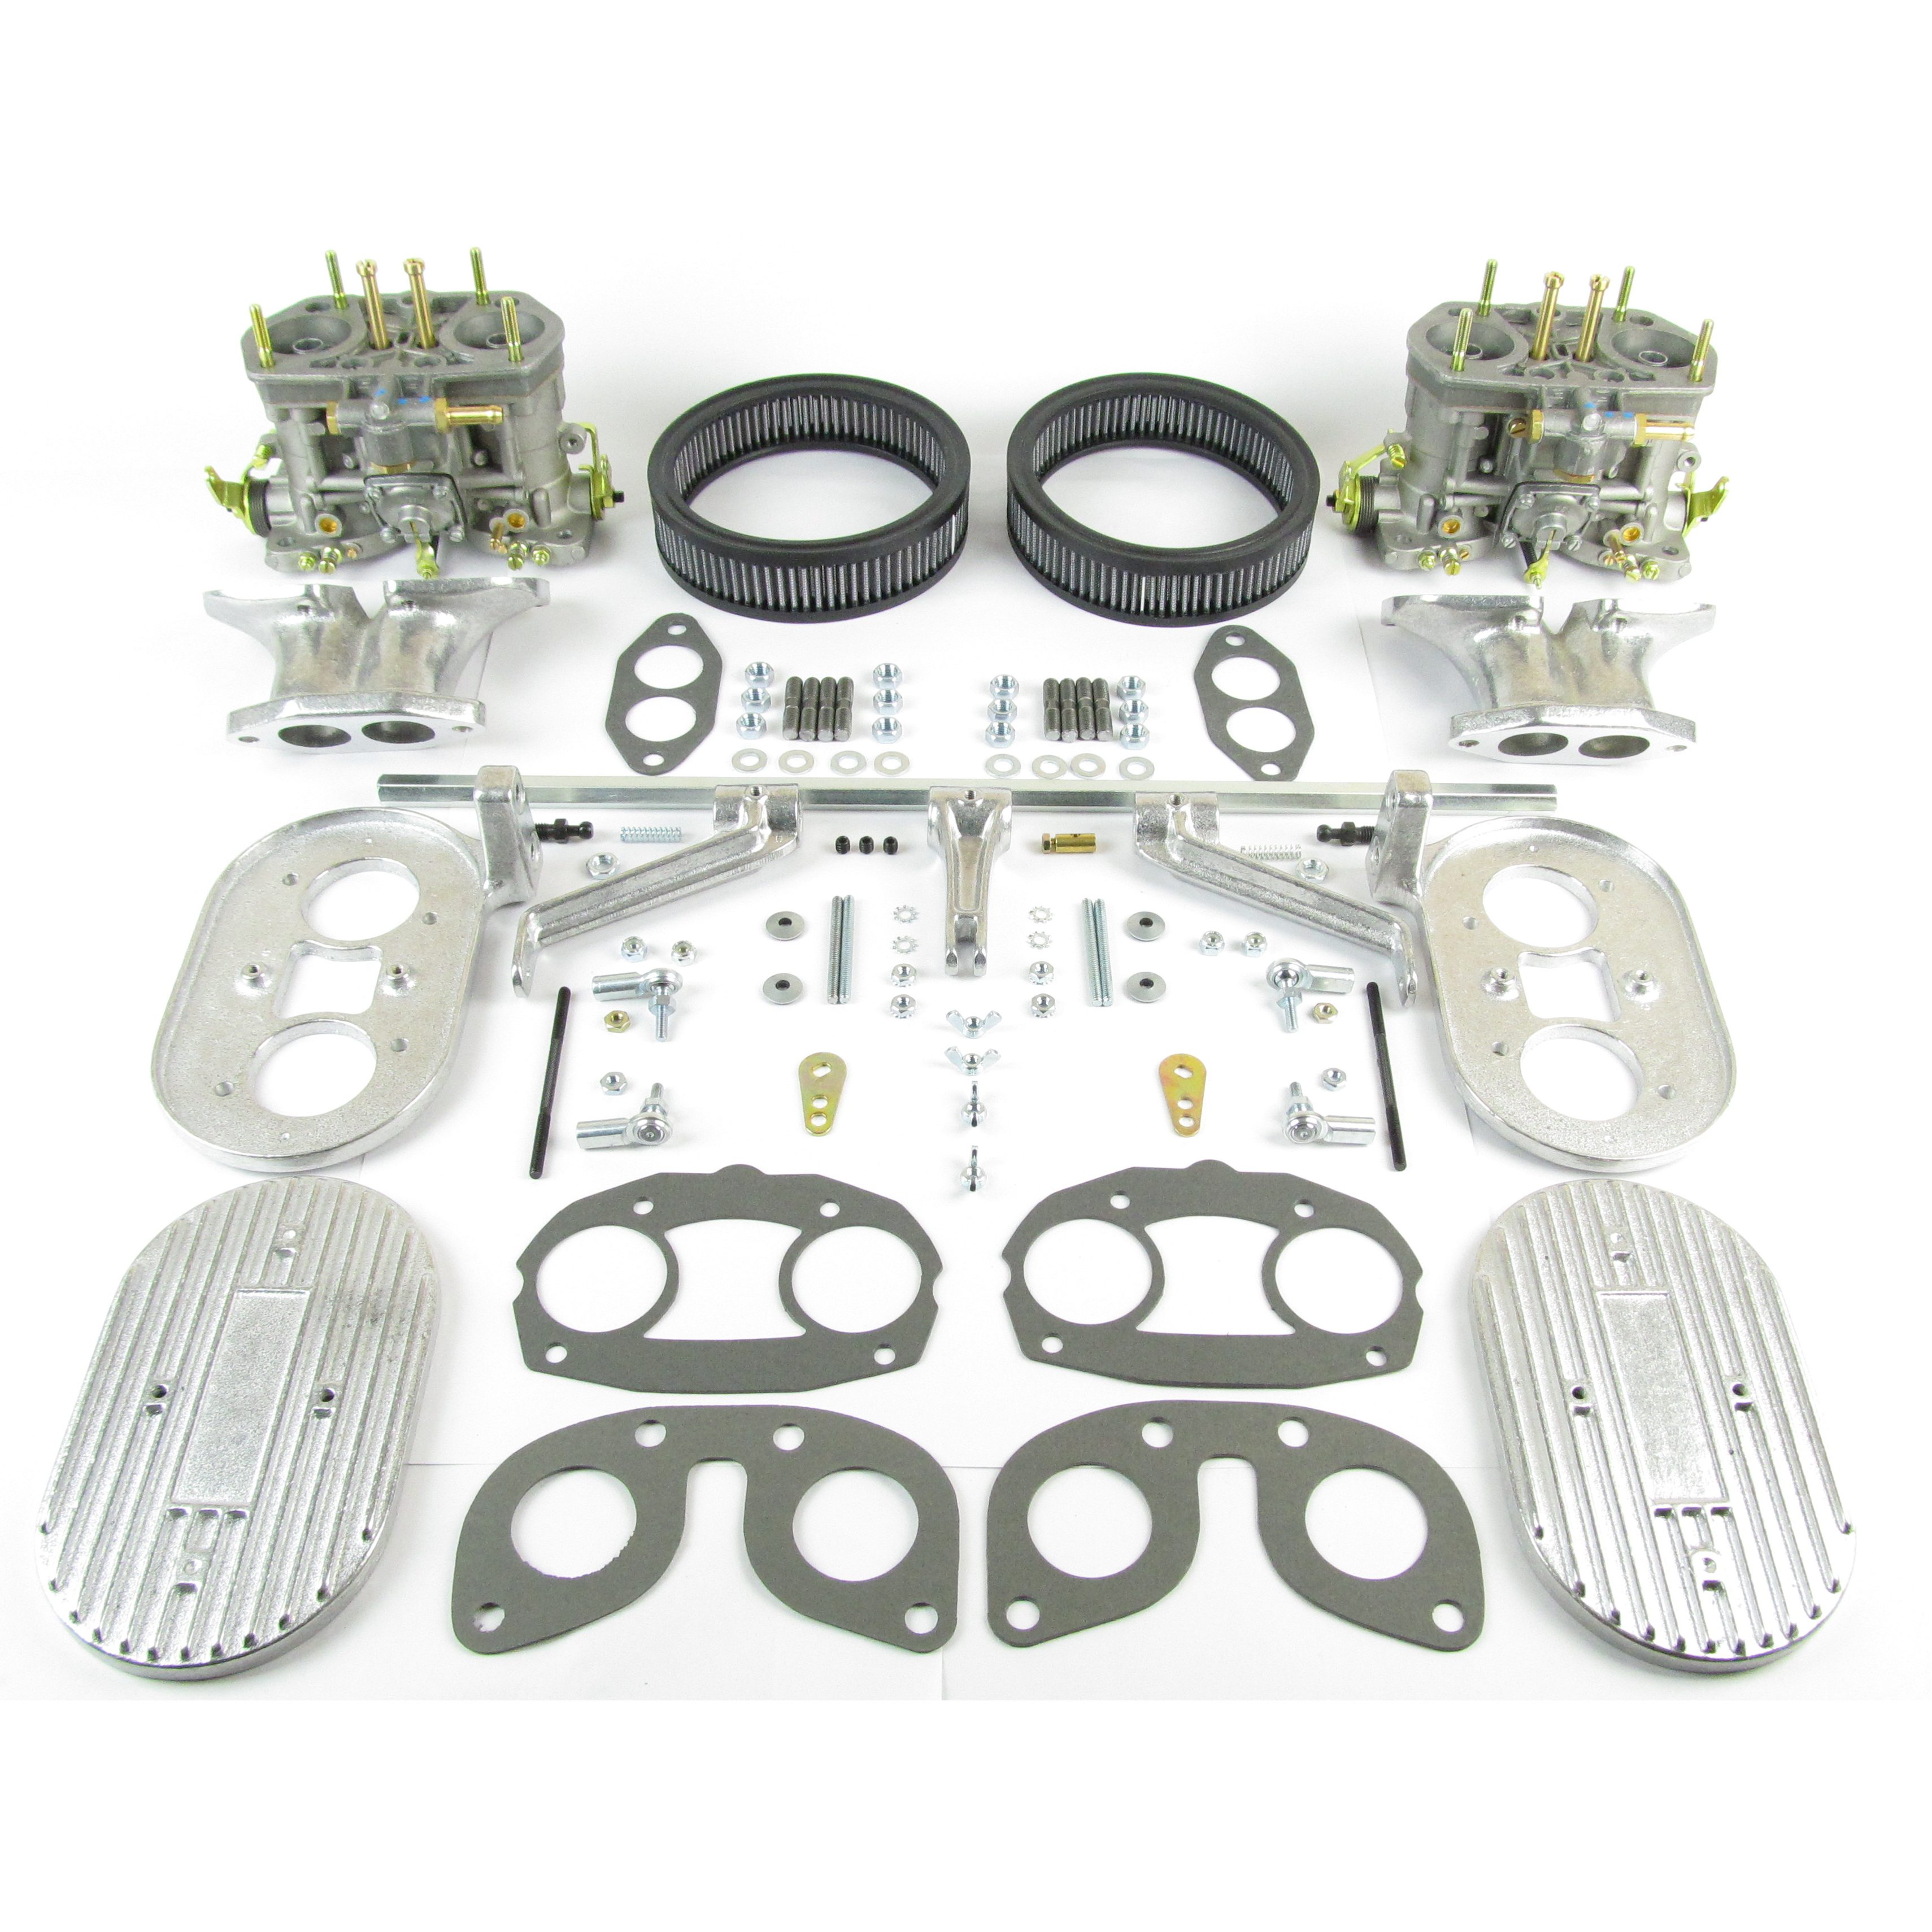 Twin Weber IDF40 carburettor kit to suit VW type 3 aircooled engines. *Genuine Weber IDF 40 carburettors – not Chinese copies* If you have been quoted a cheaper price they will either be Chinese made or not jetted to suit. Straight manifolds Cast alloy air filter bases and tops. Washable air filter elements Quality metal rose joints with left and right hand threaded rods to give precise adjustment. Manifold and air filter gaskets Assembly guide included Carburettors are re-jetted to suit engine size, please select the correct kit according to engine size.